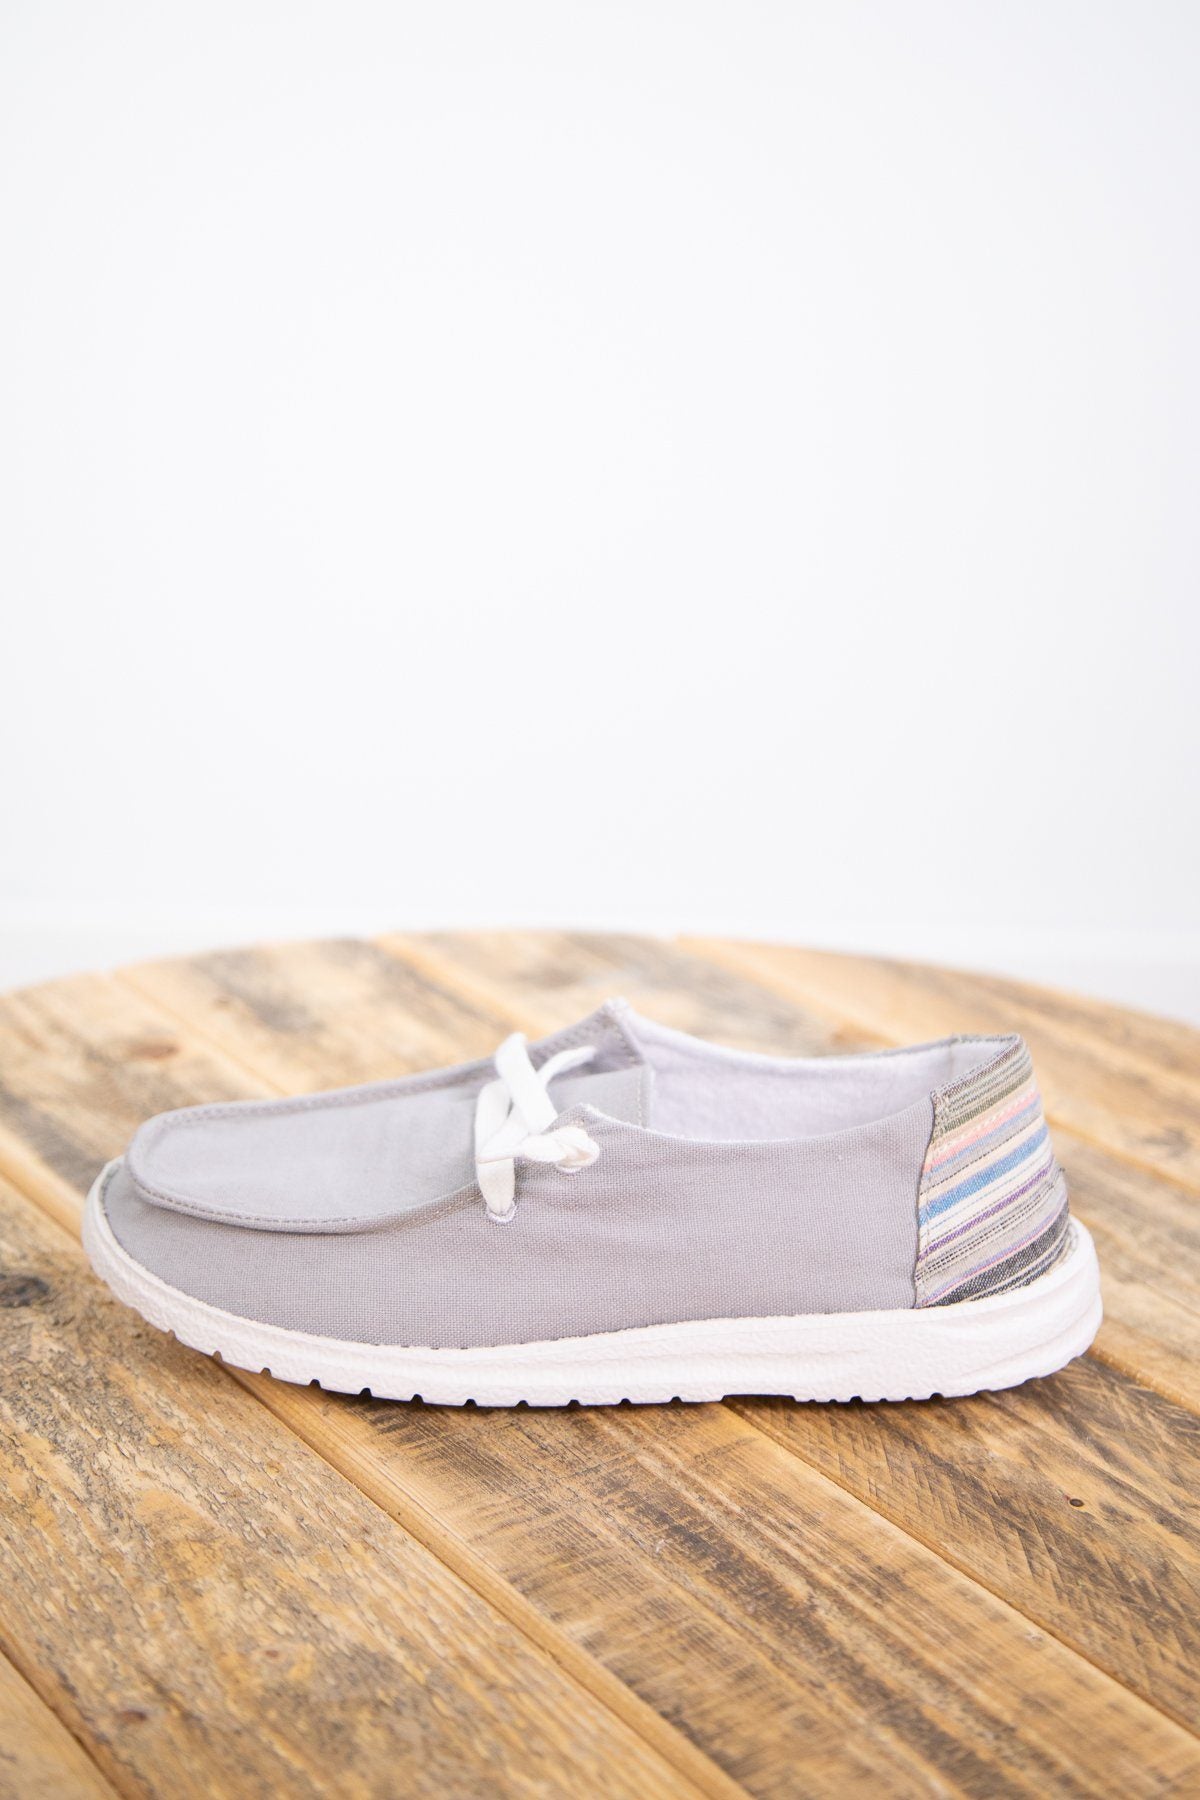 Grey Slip On Shoe with Multicolor Heel - Filly Flair